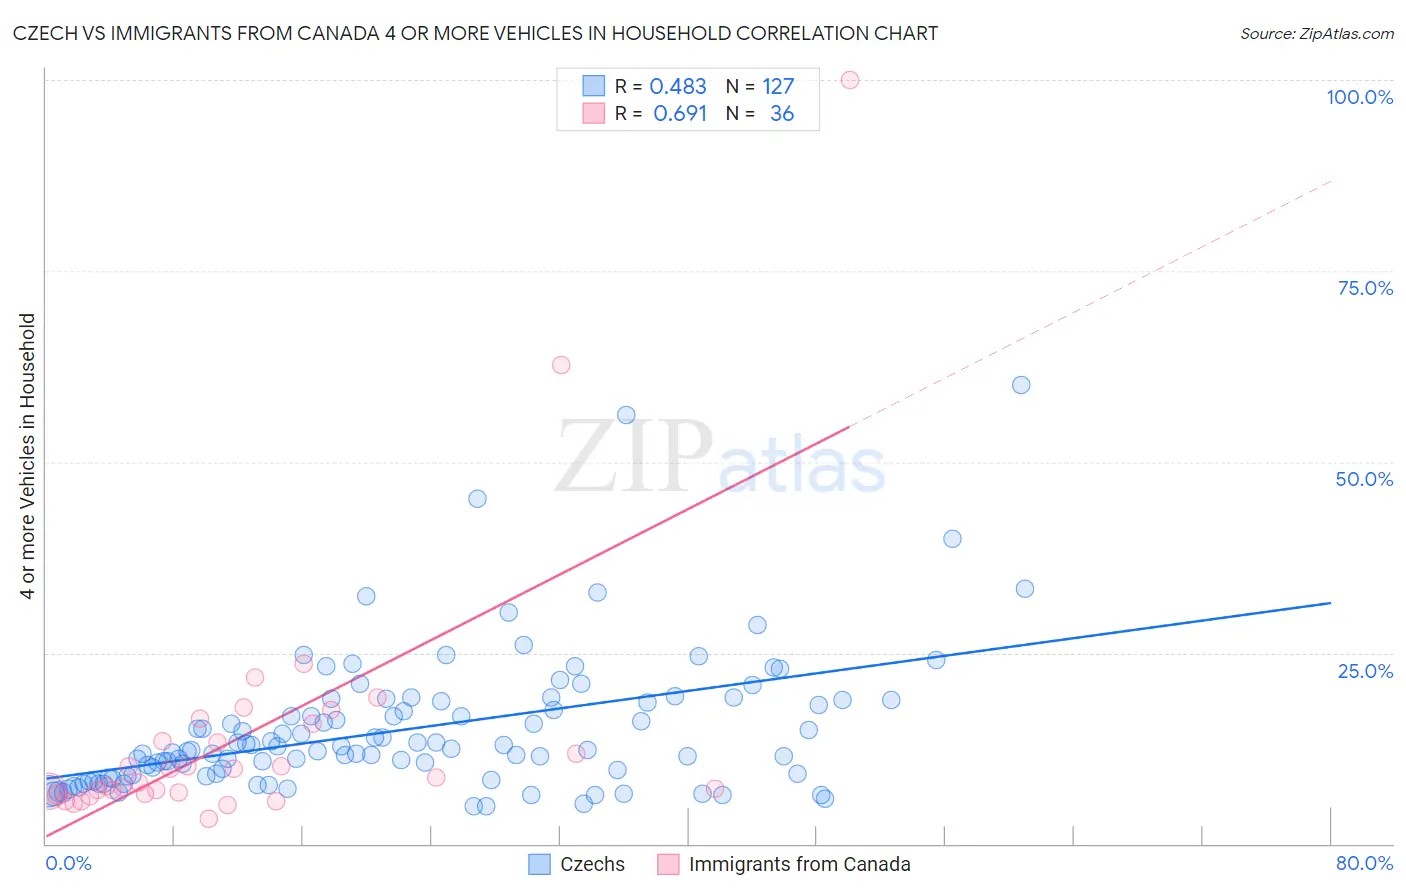 Czech vs Immigrants from Canada 4 or more Vehicles in Household